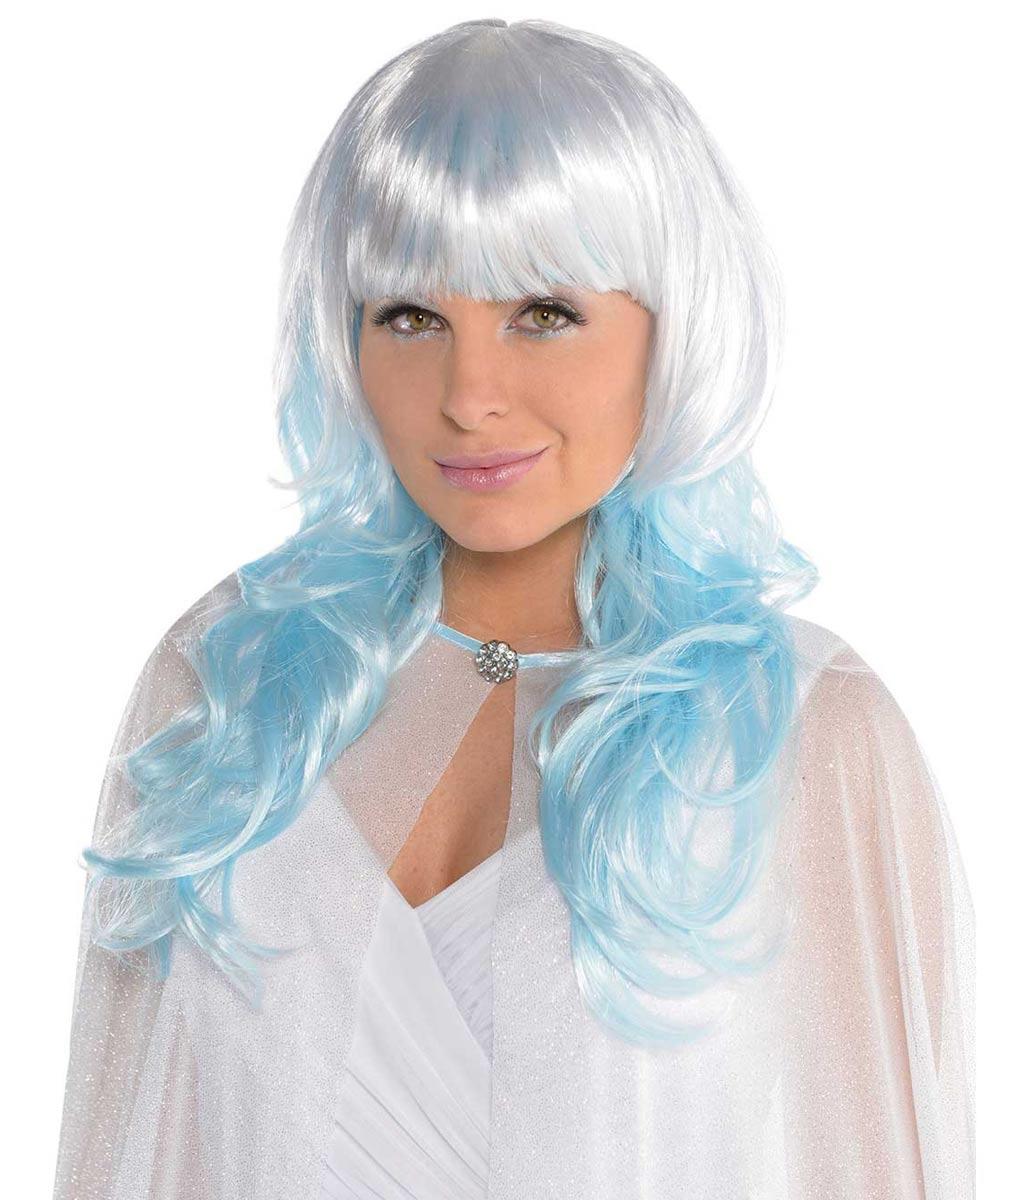 Platinum Shimmer Wig - Storybook Ice Princess Wig by Amscan / Christies 845988 and available here at Karnival Costumes online party shop